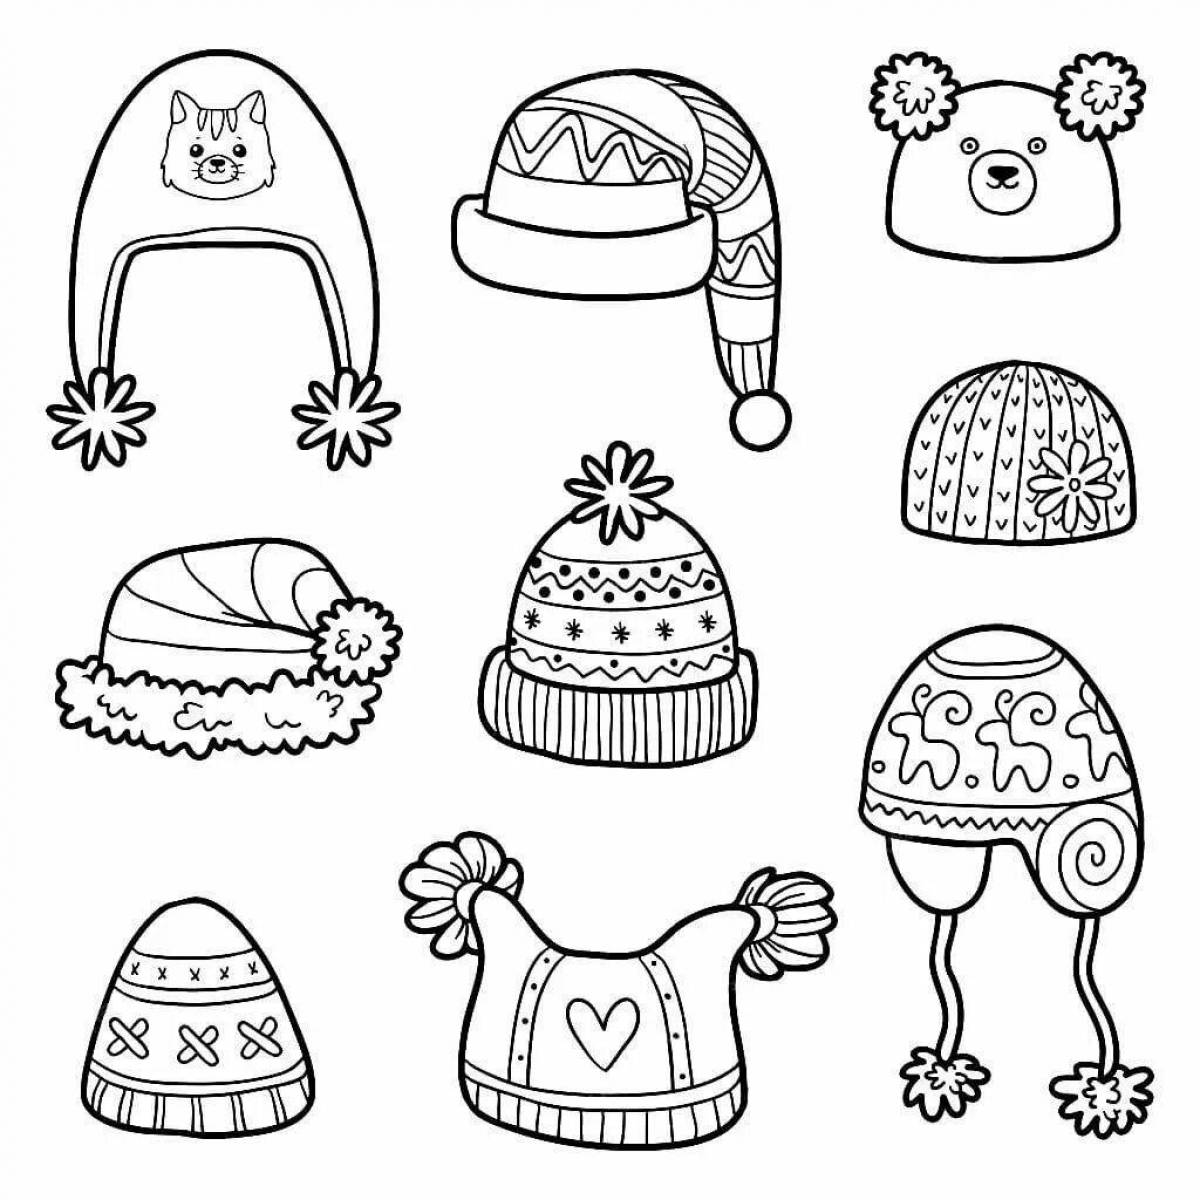 Coloring page gorgeous hat for children 2-3 years old